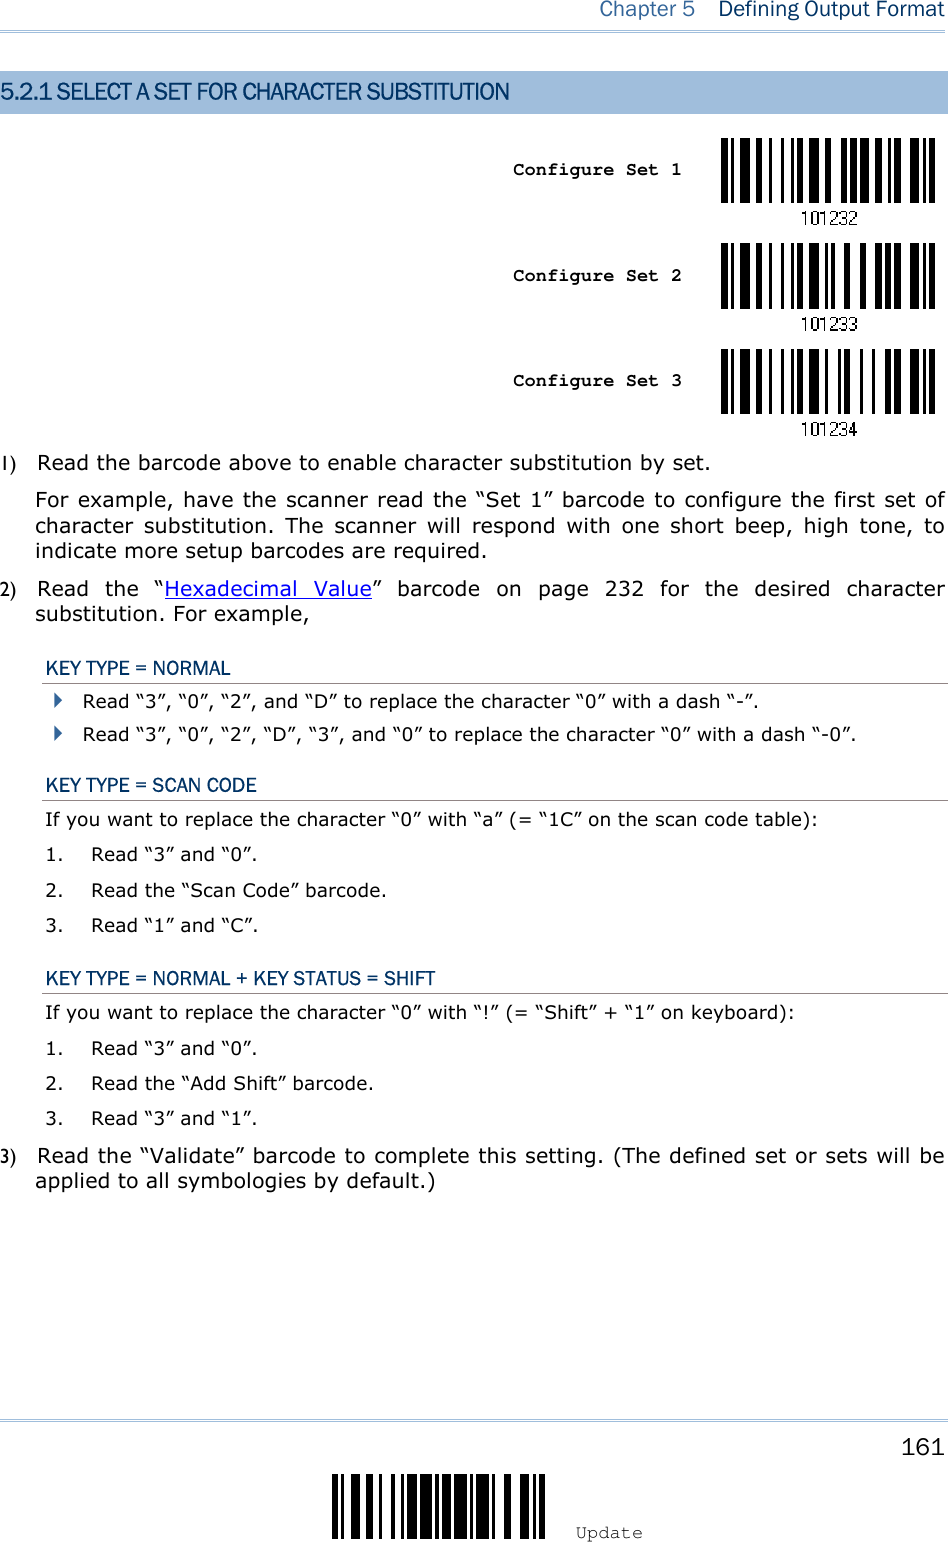    161 Update  Chapter 5   Defining Output Format 5.2.1 SELECT A SET FOR CHARACTER SUBSTITUTION    Configure Set 1     Configure Set 2     Configure Set 3  1) Read the barcode above to enable character substitution by set.   For example, have the scanner read the “Set 1” barcode to configure the first set of character  substitution.  The  scanner  will  respond  with  one  short  beep,  high  tone,  to indicate more setup barcodes are required. 2) Read  the  “Hexadecimal  Value”  barcode  on  page  232  for  the  desired  character substitution. For example, KEY TYPE = NORMAL  Read “3”, “0”, “2”, and “D” to replace the character “0” with a dash “-”.  Read “3”, “0”, “2”, “D”, “3”, and “0” to replace the character “0” with a dash “-0”. KEY TYPE = SCAN CODE If you want to replace the character “0” with “a” (= “1C” on the scan code table): 1. Read “3” and “0”. 2. Read the “Scan Code” barcode. 3. Read “1” and “C”. KEY TYPE = NORMAL + KEY STATUS = SHIFT If you want to replace the character “0” with “!” (= “Shift” + “1” on keyboard): 1. Read “3” and “0”. 2. Read the “Add Shift” barcode. 3. Read “3” and “1”. 3) Read the “Validate” barcode to complete this setting. (The defined set or sets will be applied to all symbologies by default.)  